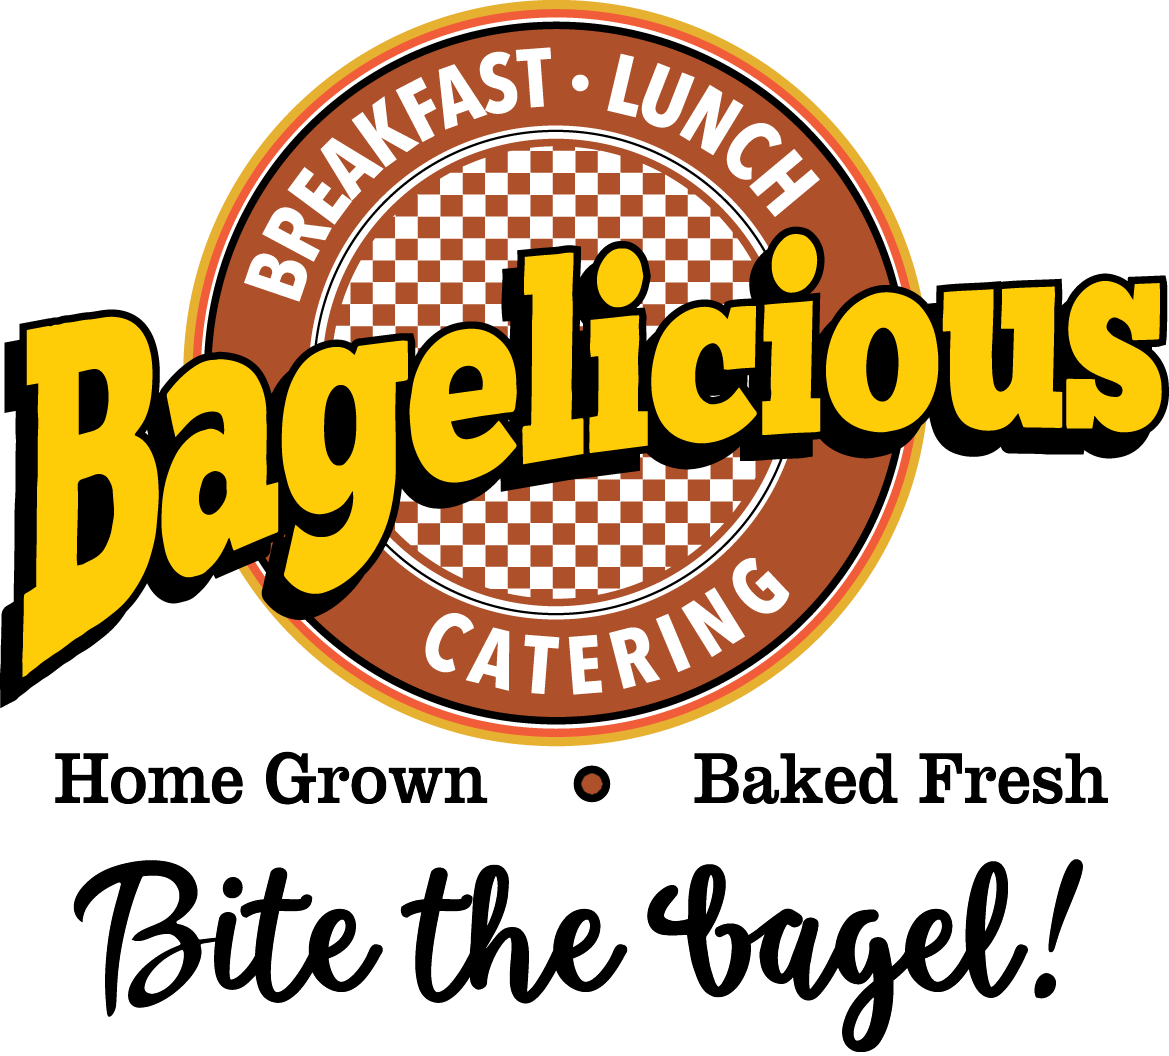 Bagel Logo - Breakfast, Lunch, & Catering; Home Grown, Baked Fresh • Bagelicious